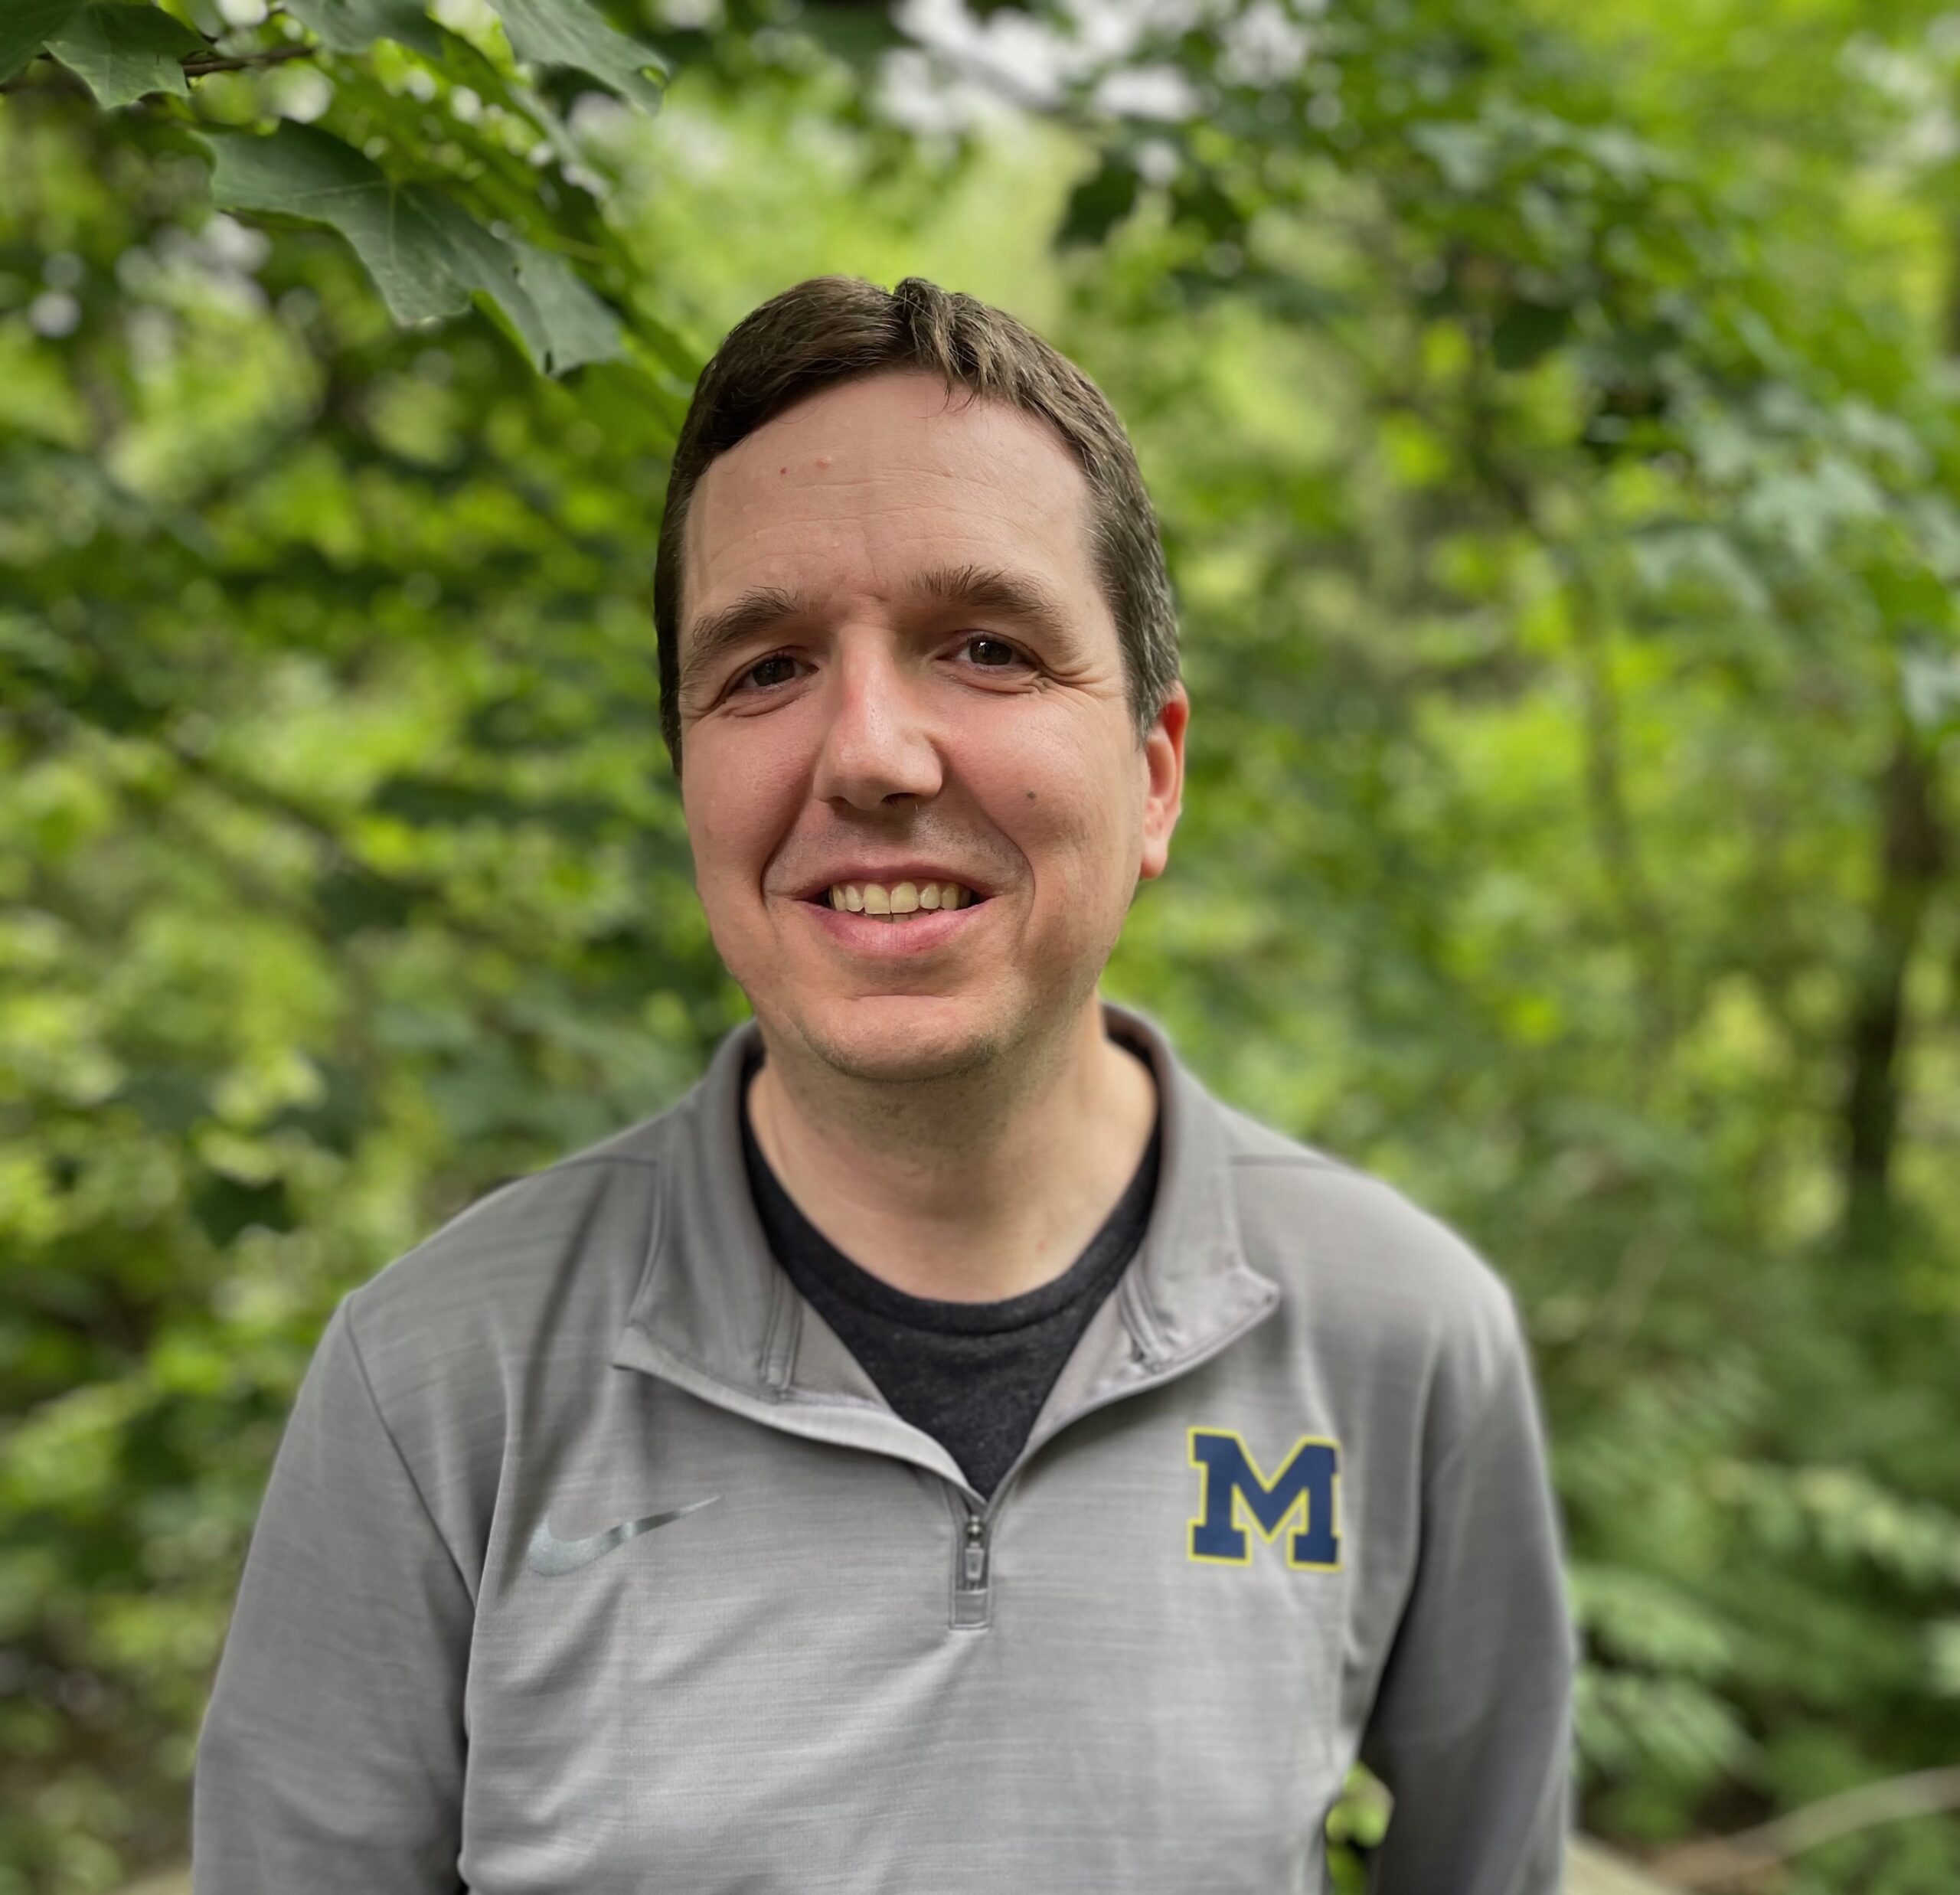 Photo of a man with short brown hair, smiling, wearing a grey zipped-front shirt with a University of Michigan navy blue block M trimmed in yellow, over a black t-shirt.